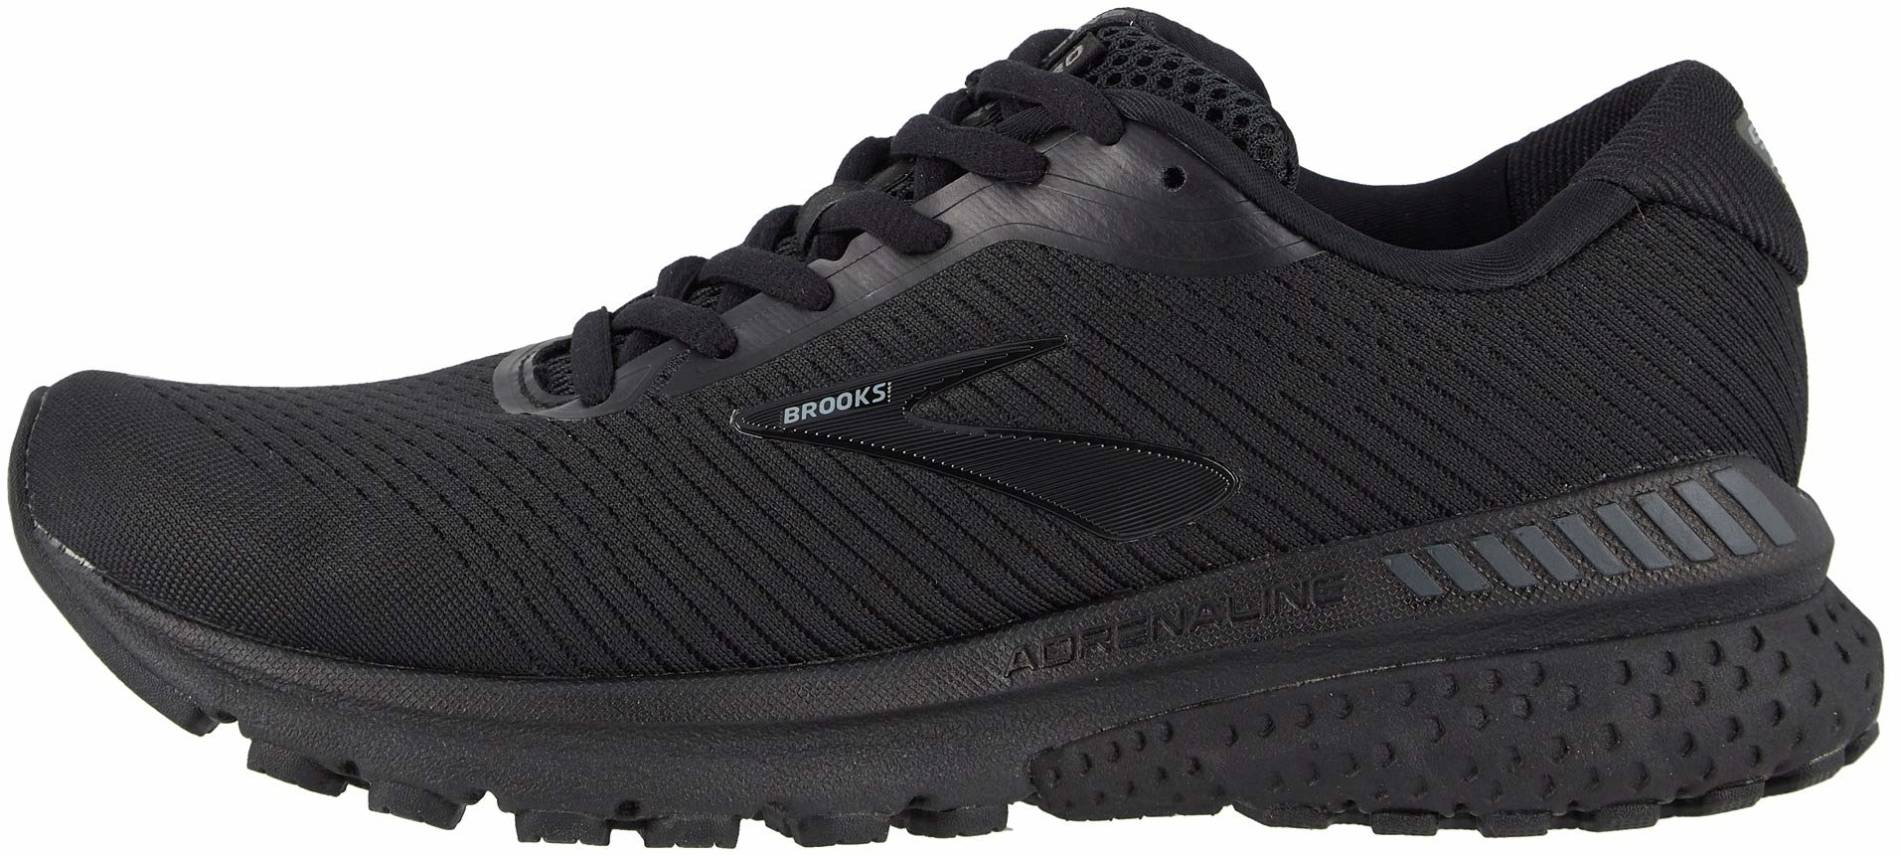 Brooks Adrenaline GTS 20 Running Shoes Mens Support Trainers UK 11.5 EUR 46.5 